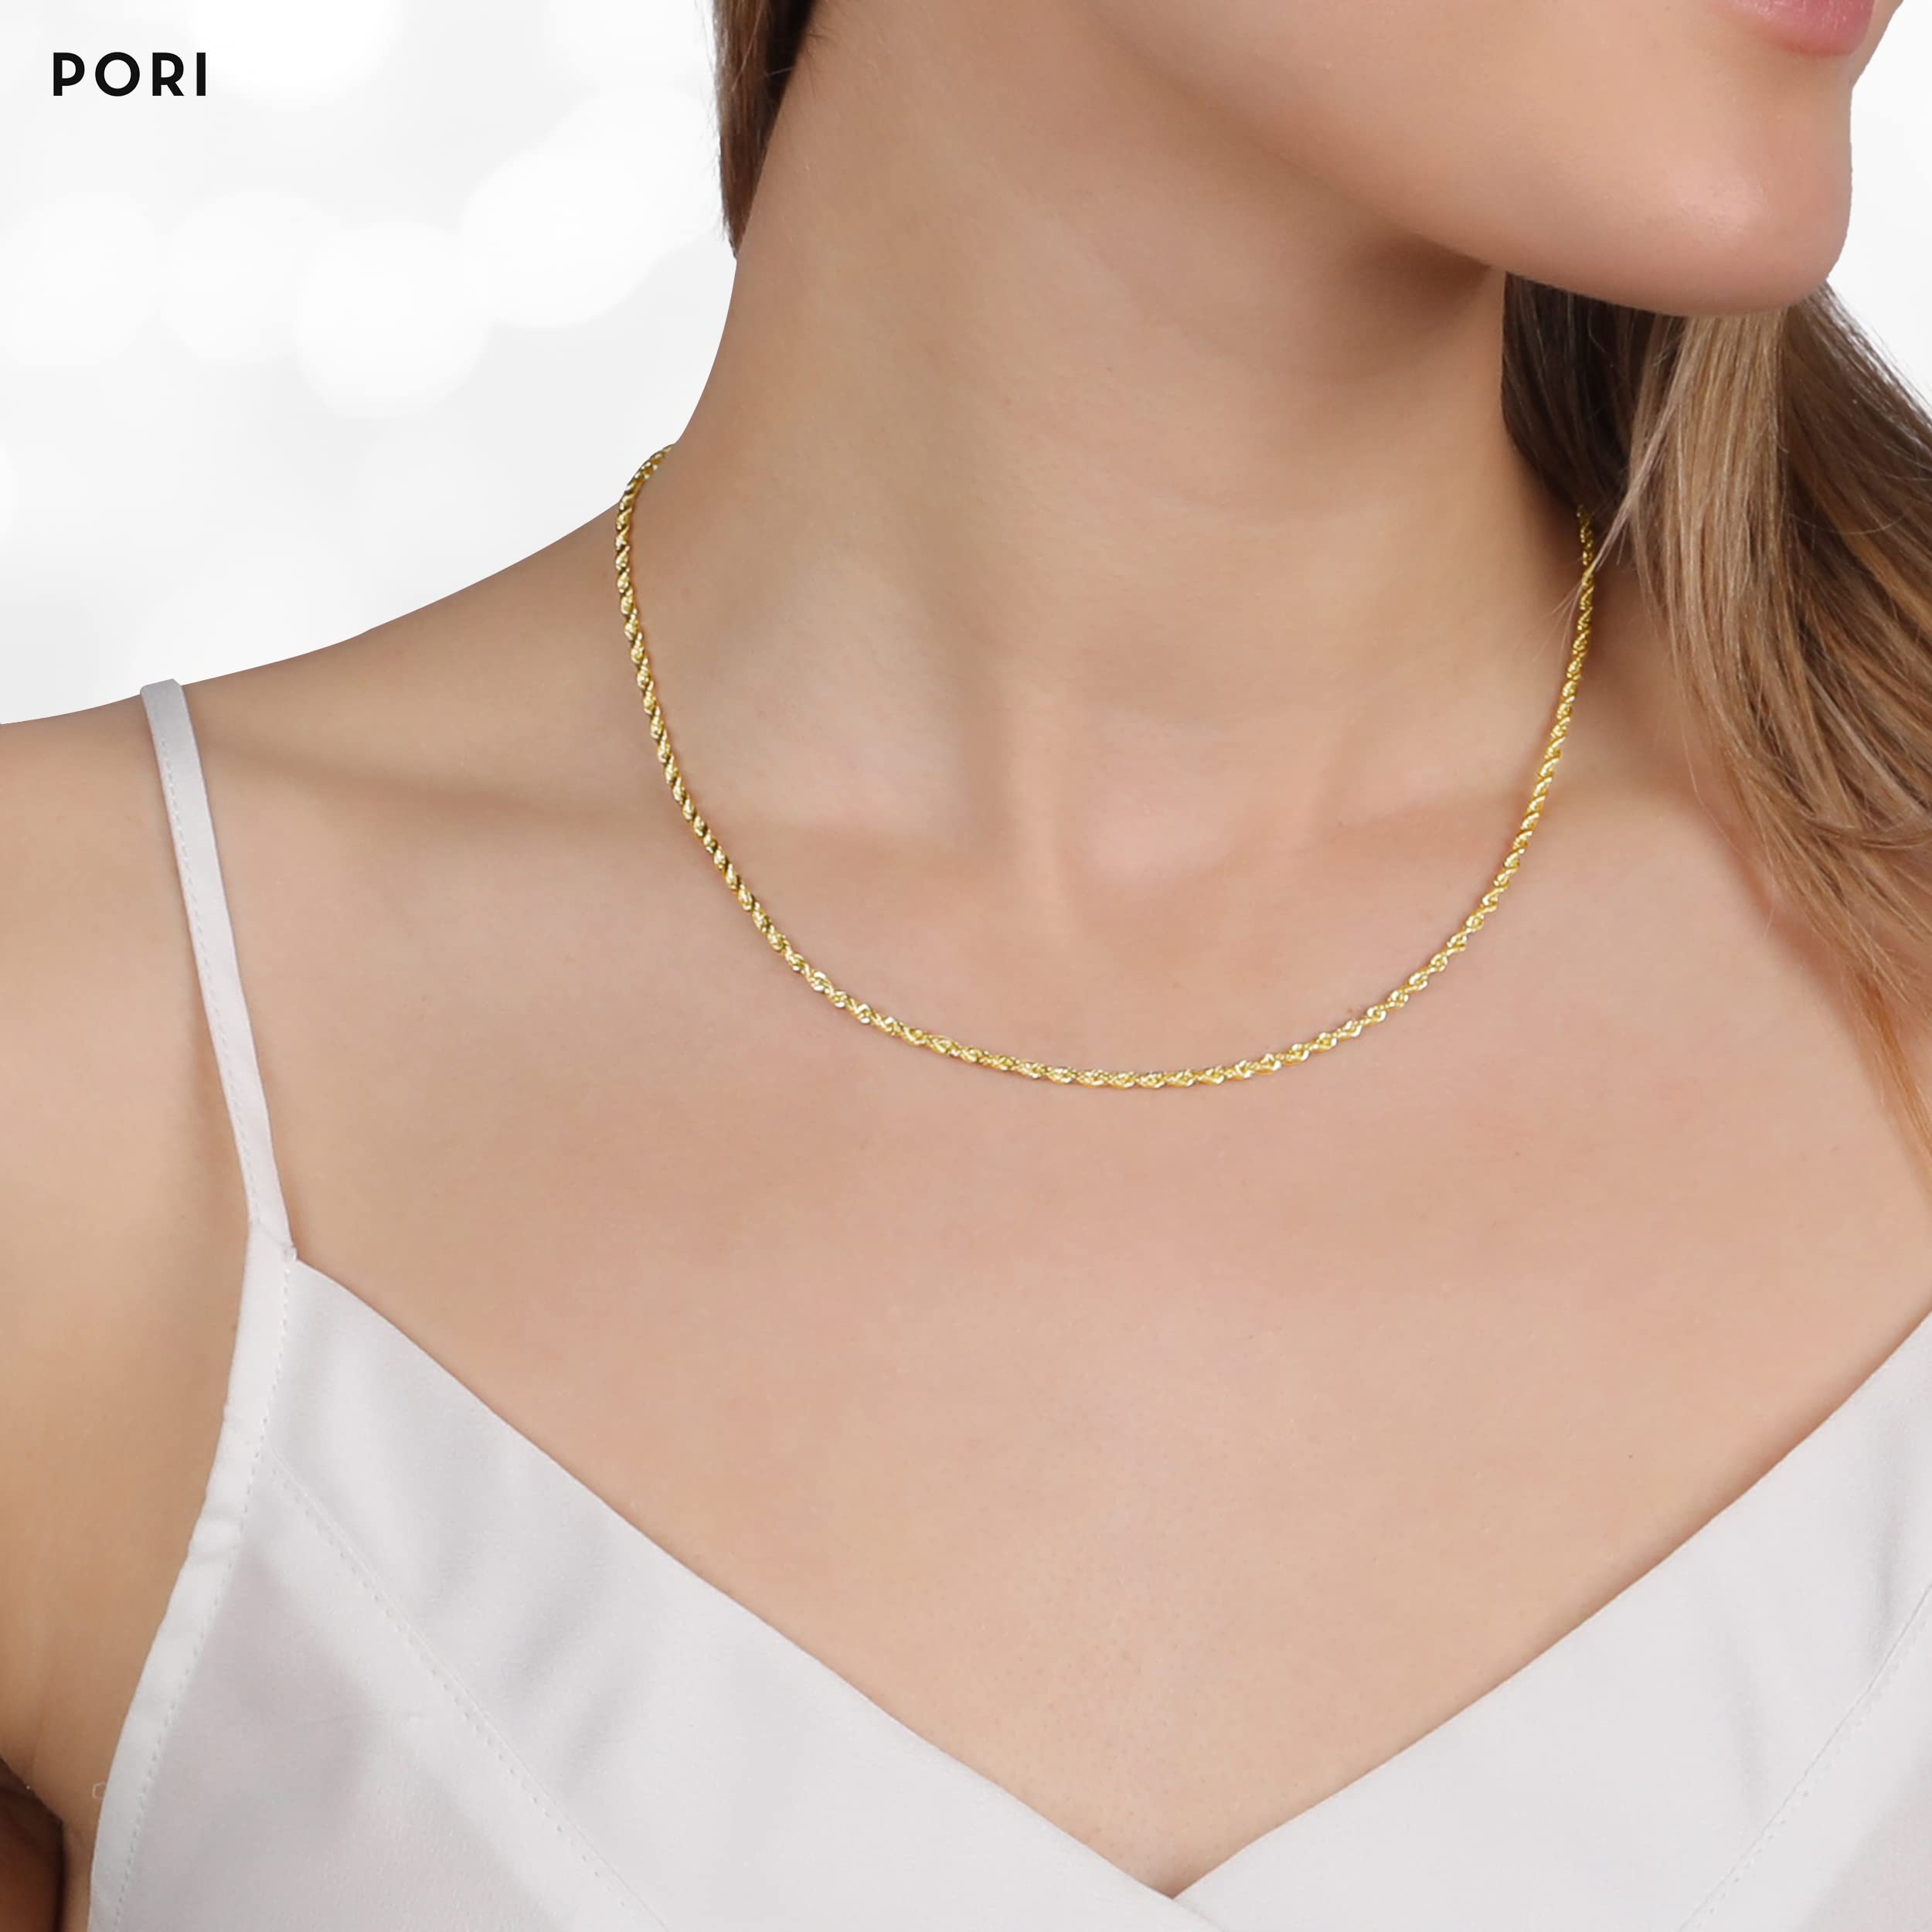 PORI JEWELERS 10K Yellow Gold 1.5MM,2MM,2.5MM,3MM,3.5,4MM,5MM,7MM, Diamond Cut Rope Chain Necklace Unisex Sizes 16